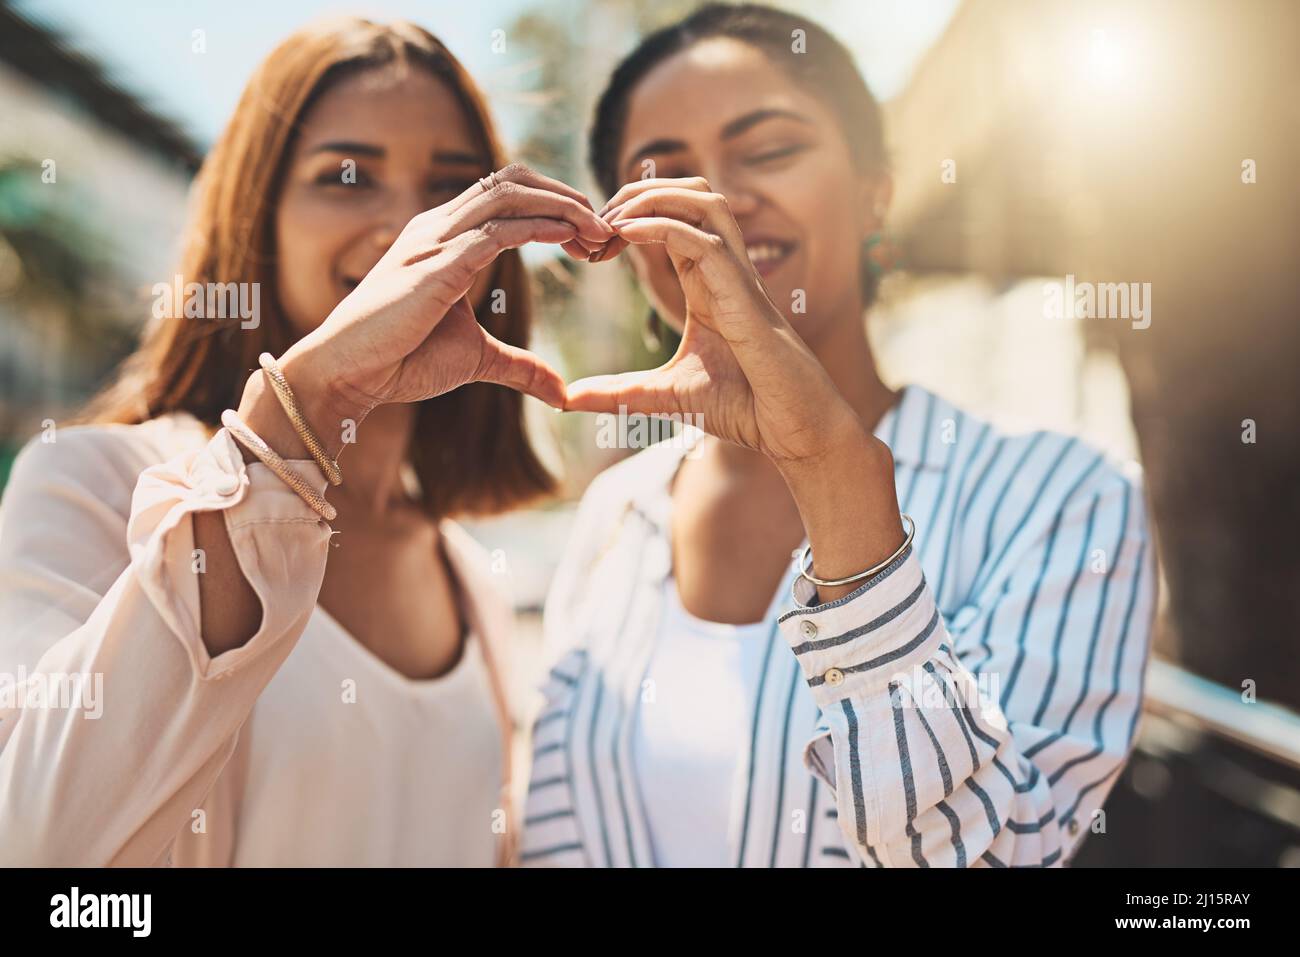 Love keeps your friendships strong. Shot of two cheerful young women forming a heart shape with their hands together while standing outside during the Stock Photo